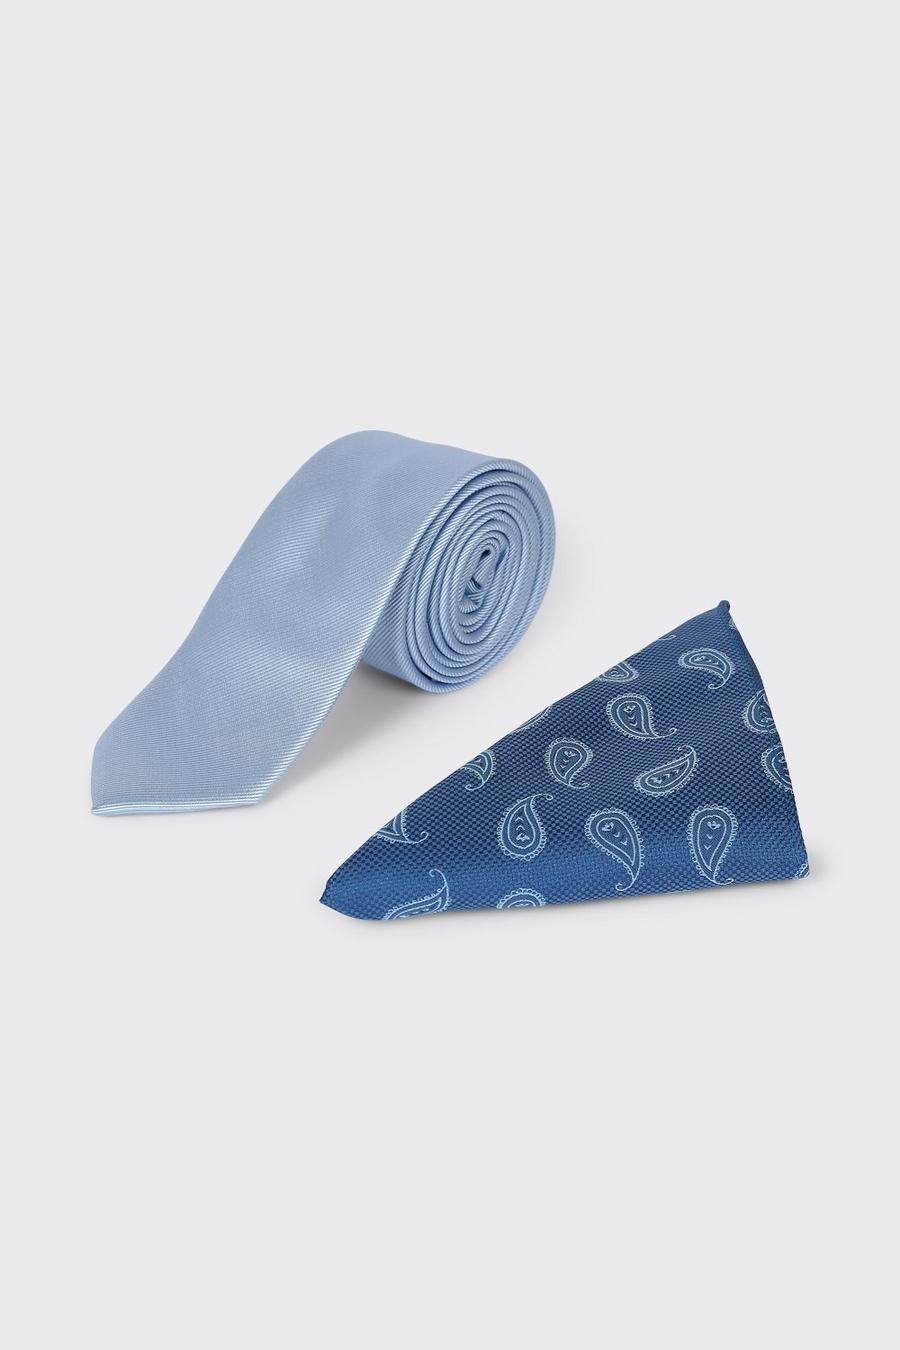 Paisley Soft Blue Tie And Pocket Square